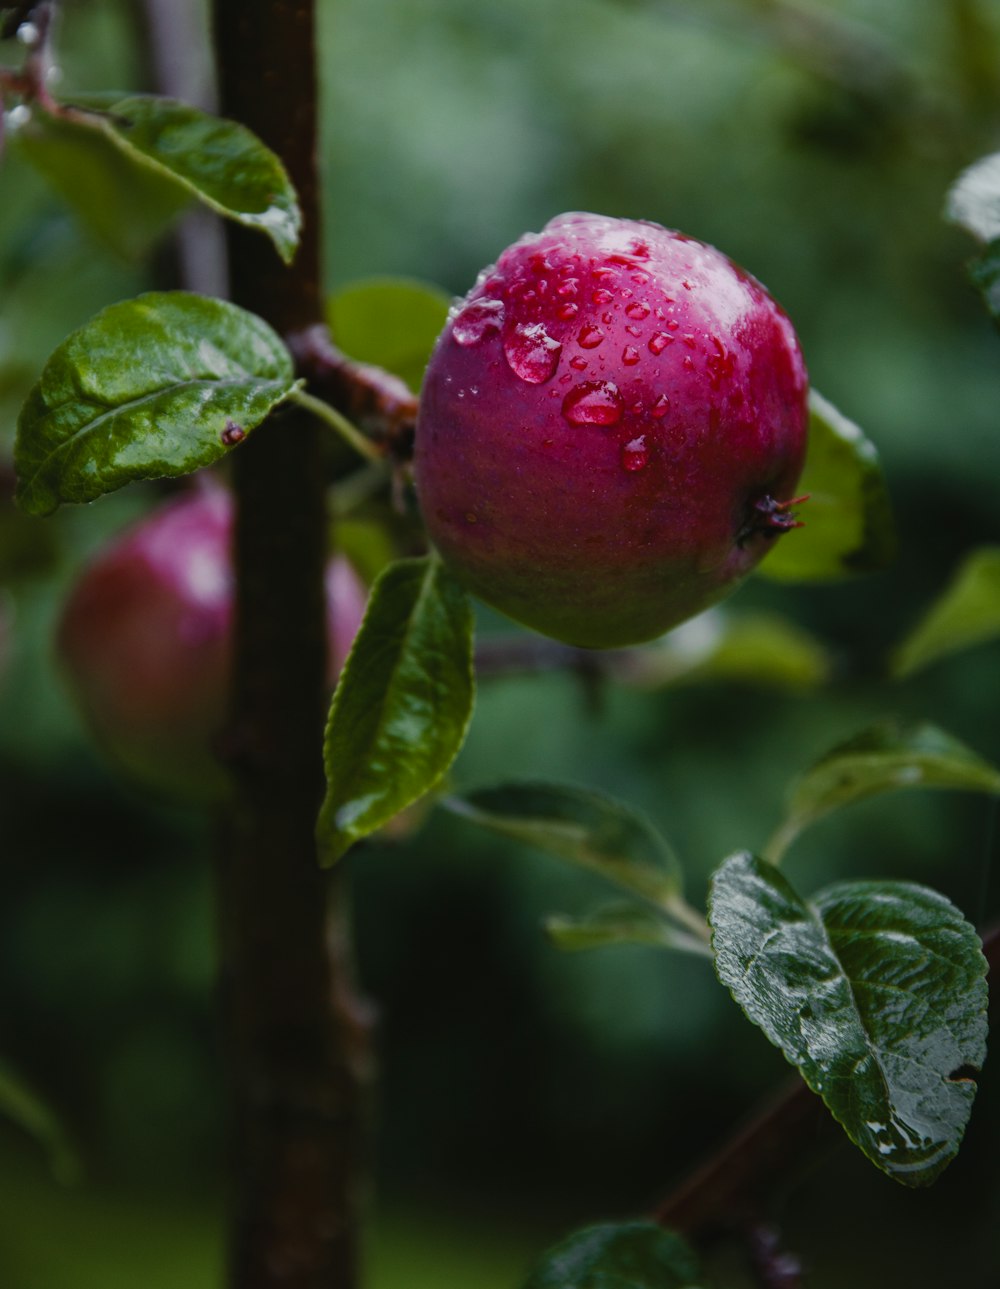 a close up of an apple on a tree